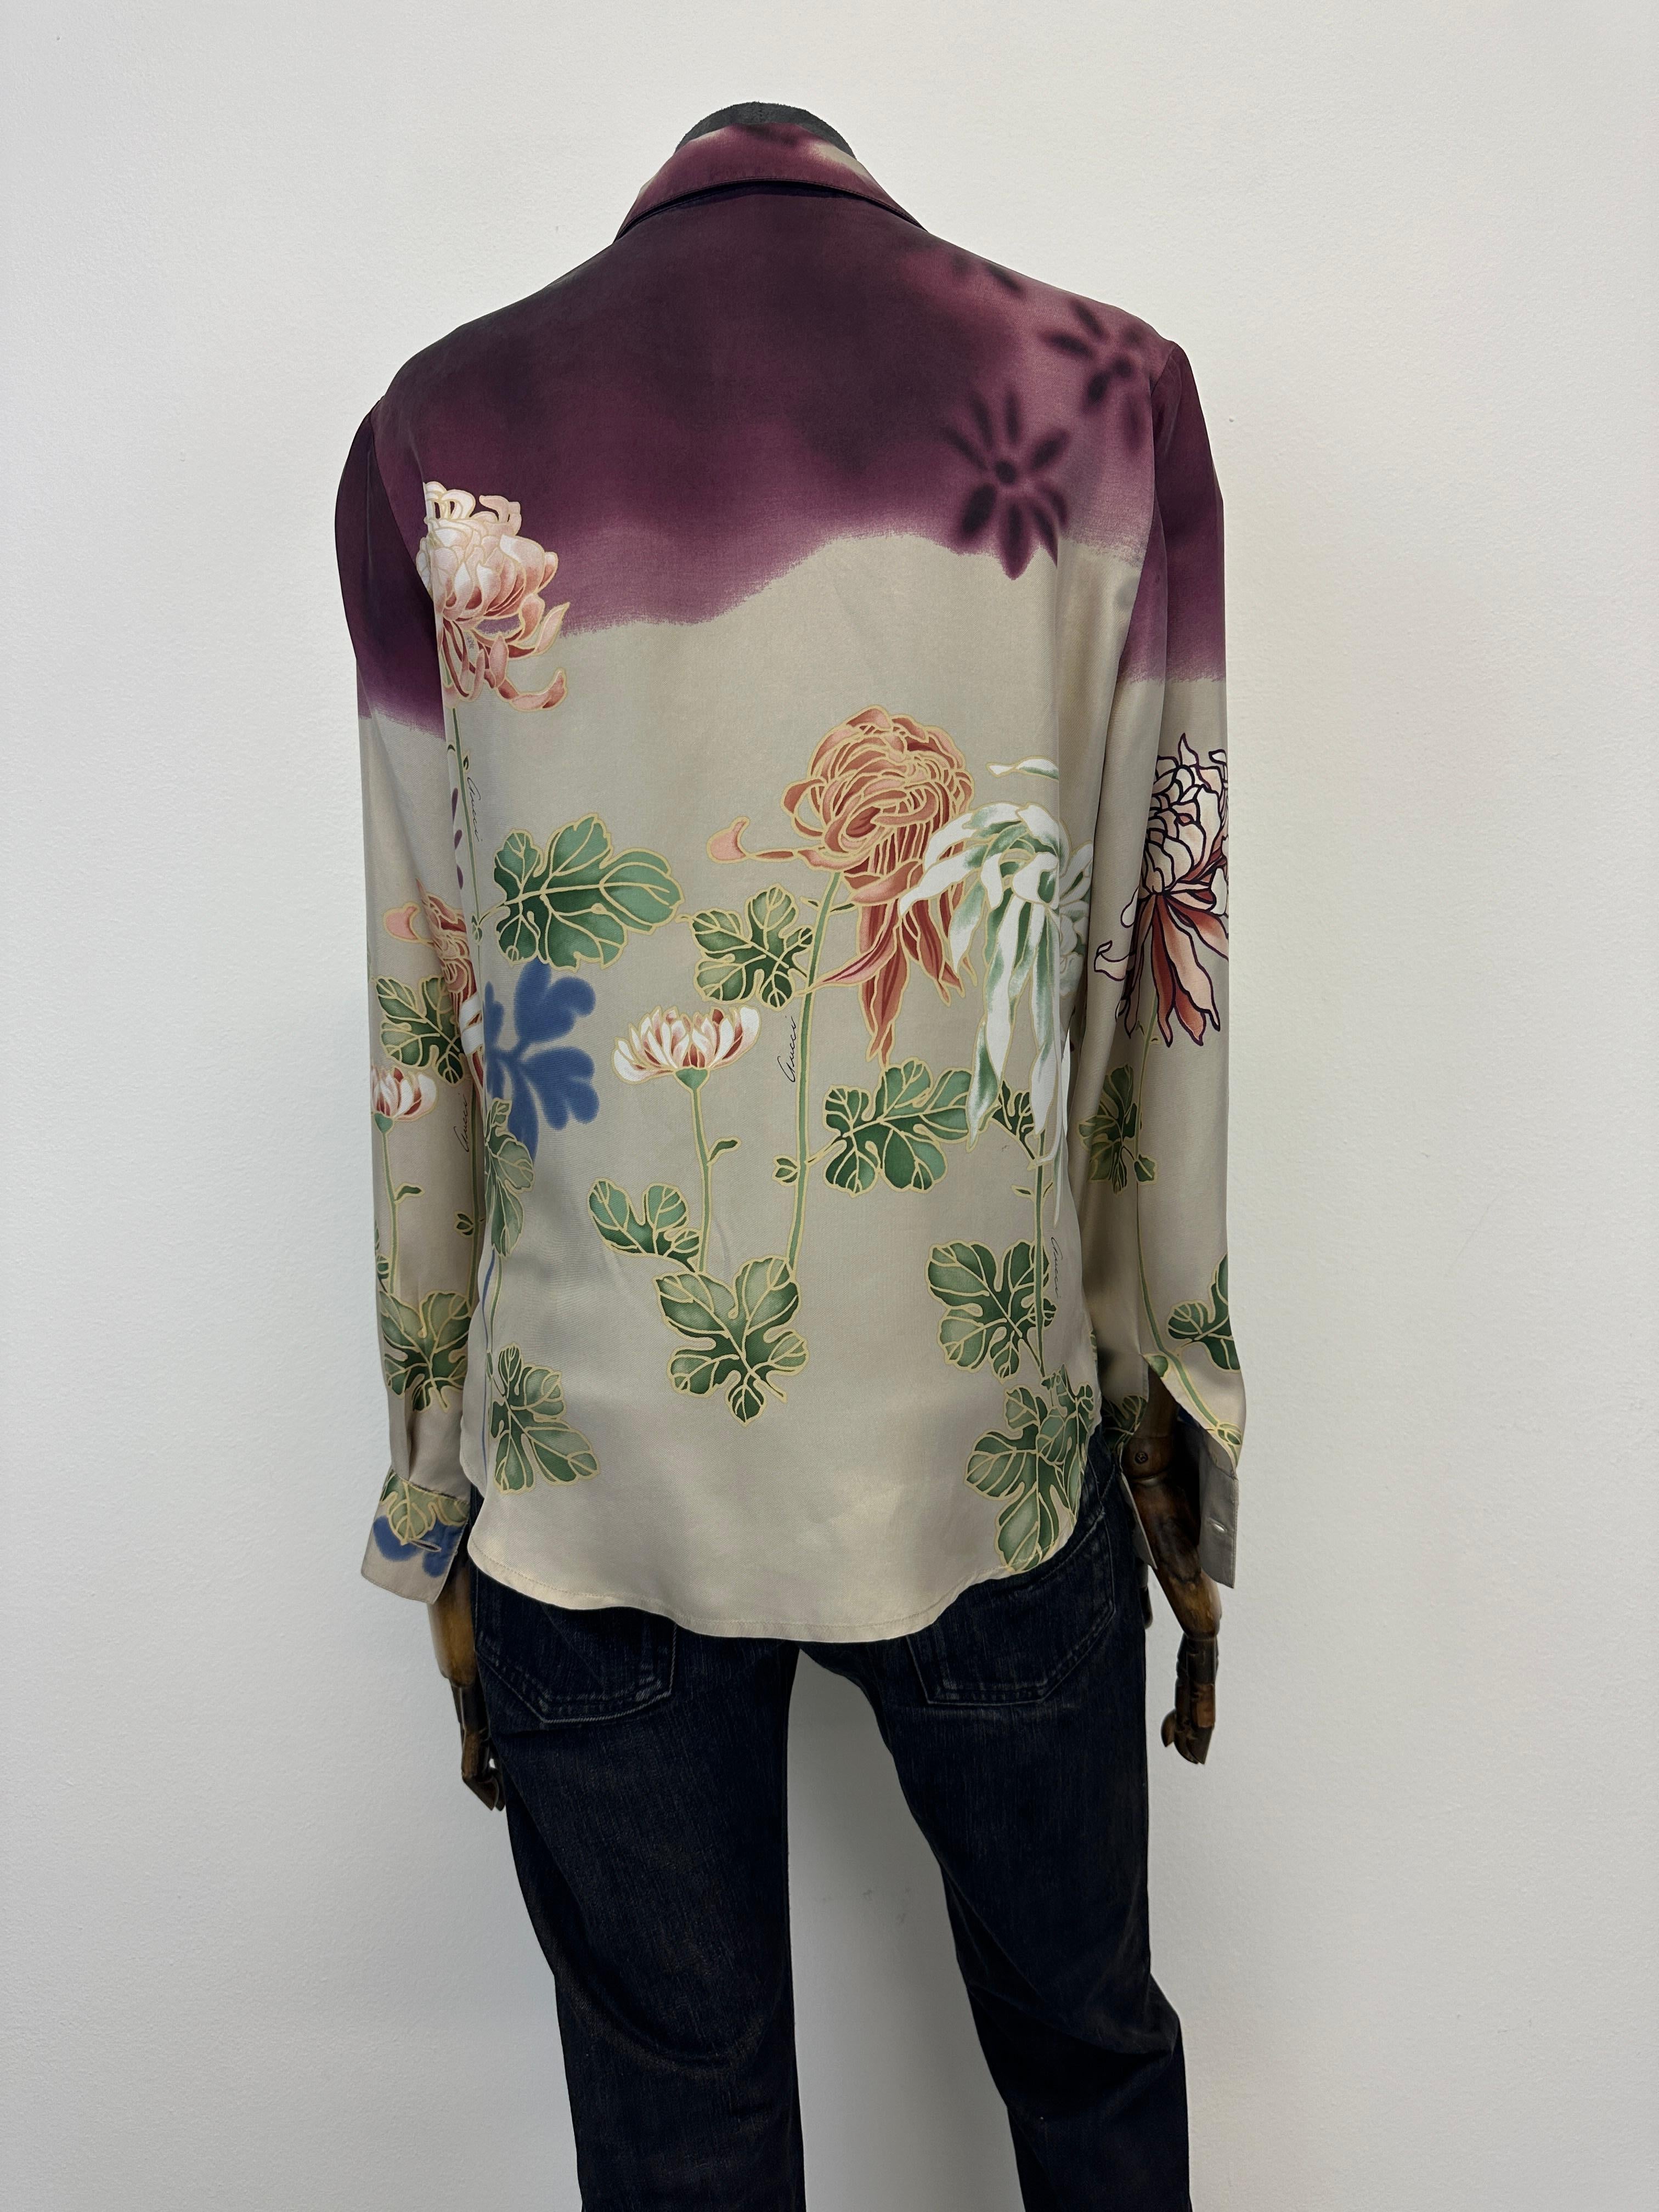 S/S 2001 Gucci by Tom Ford Chrysanthemum silk shirt In Good Condition For Sale In Padova, IT